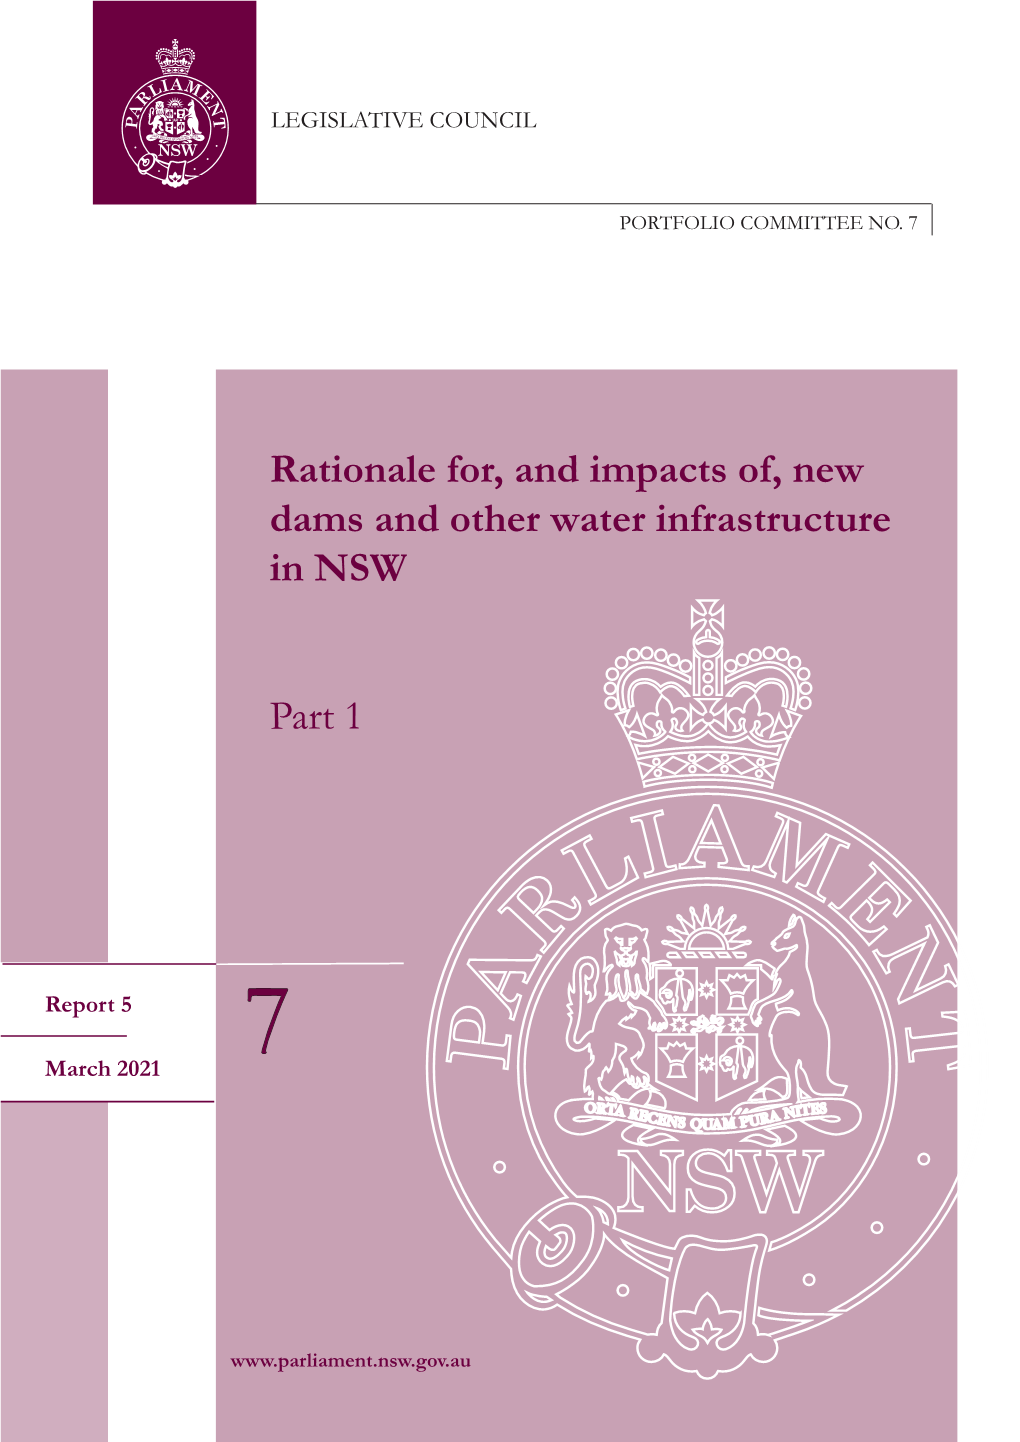 Rationale For, and Impacts Of, New Dams and Other Water Infrastructure in NSW